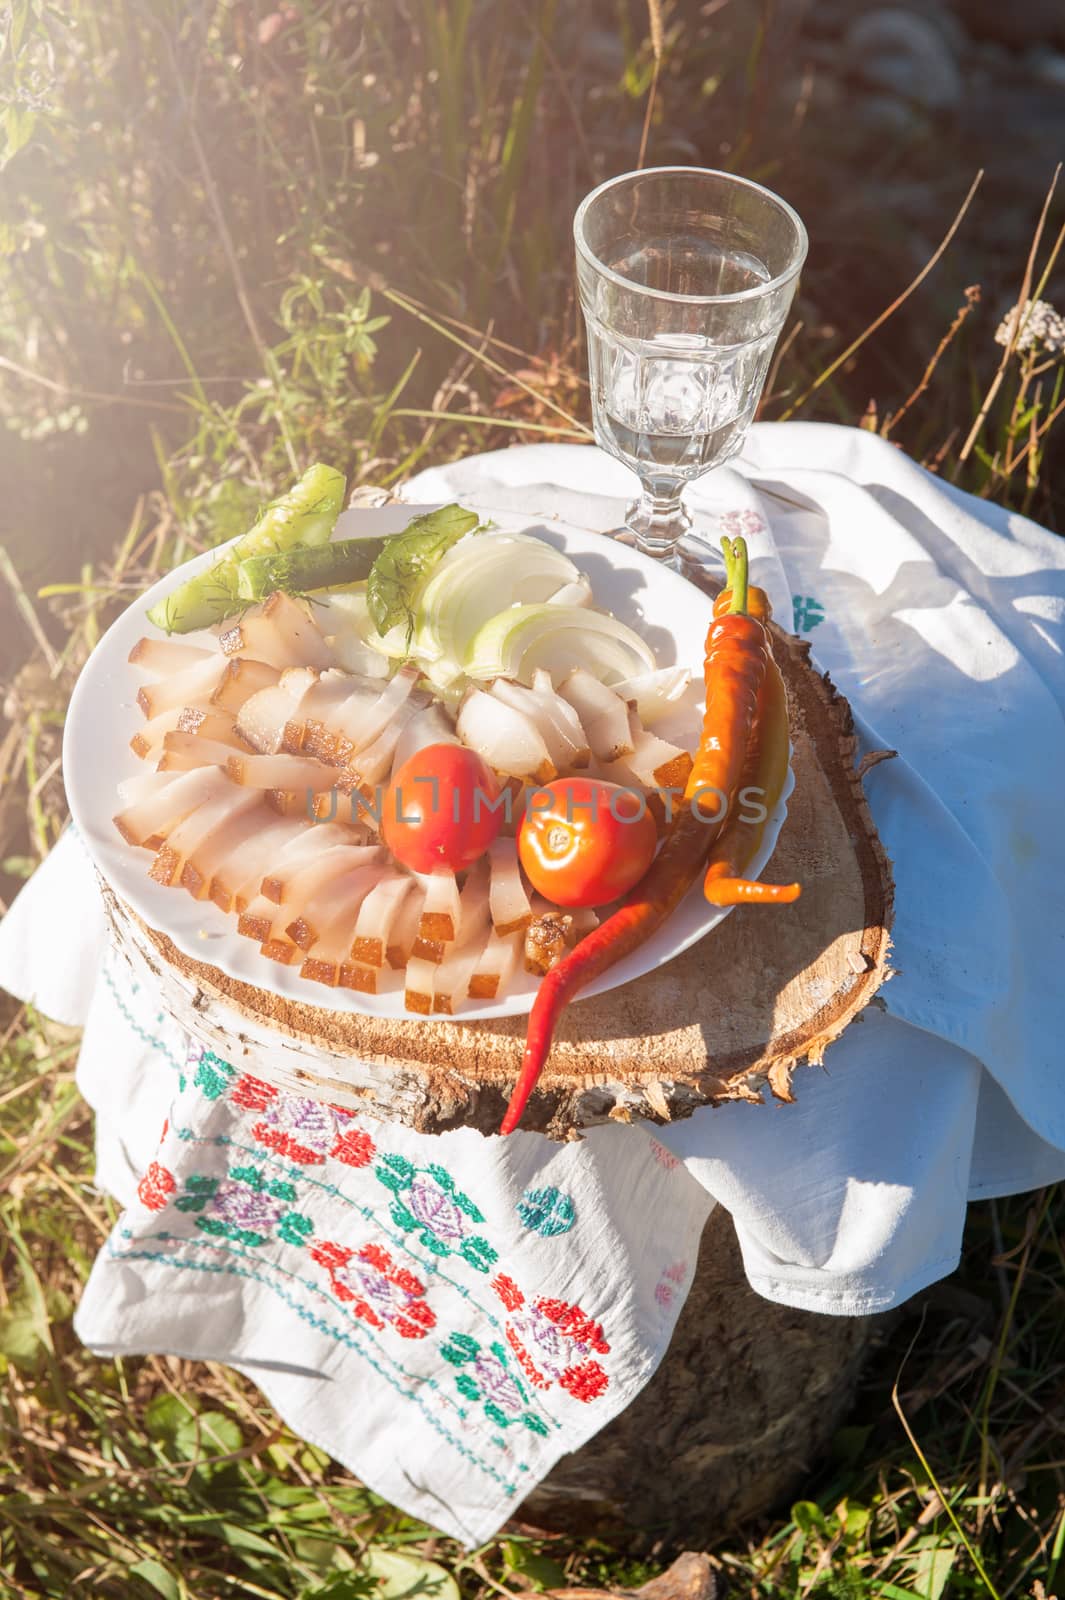 Russian vodka in small glass with snacks at outdoors